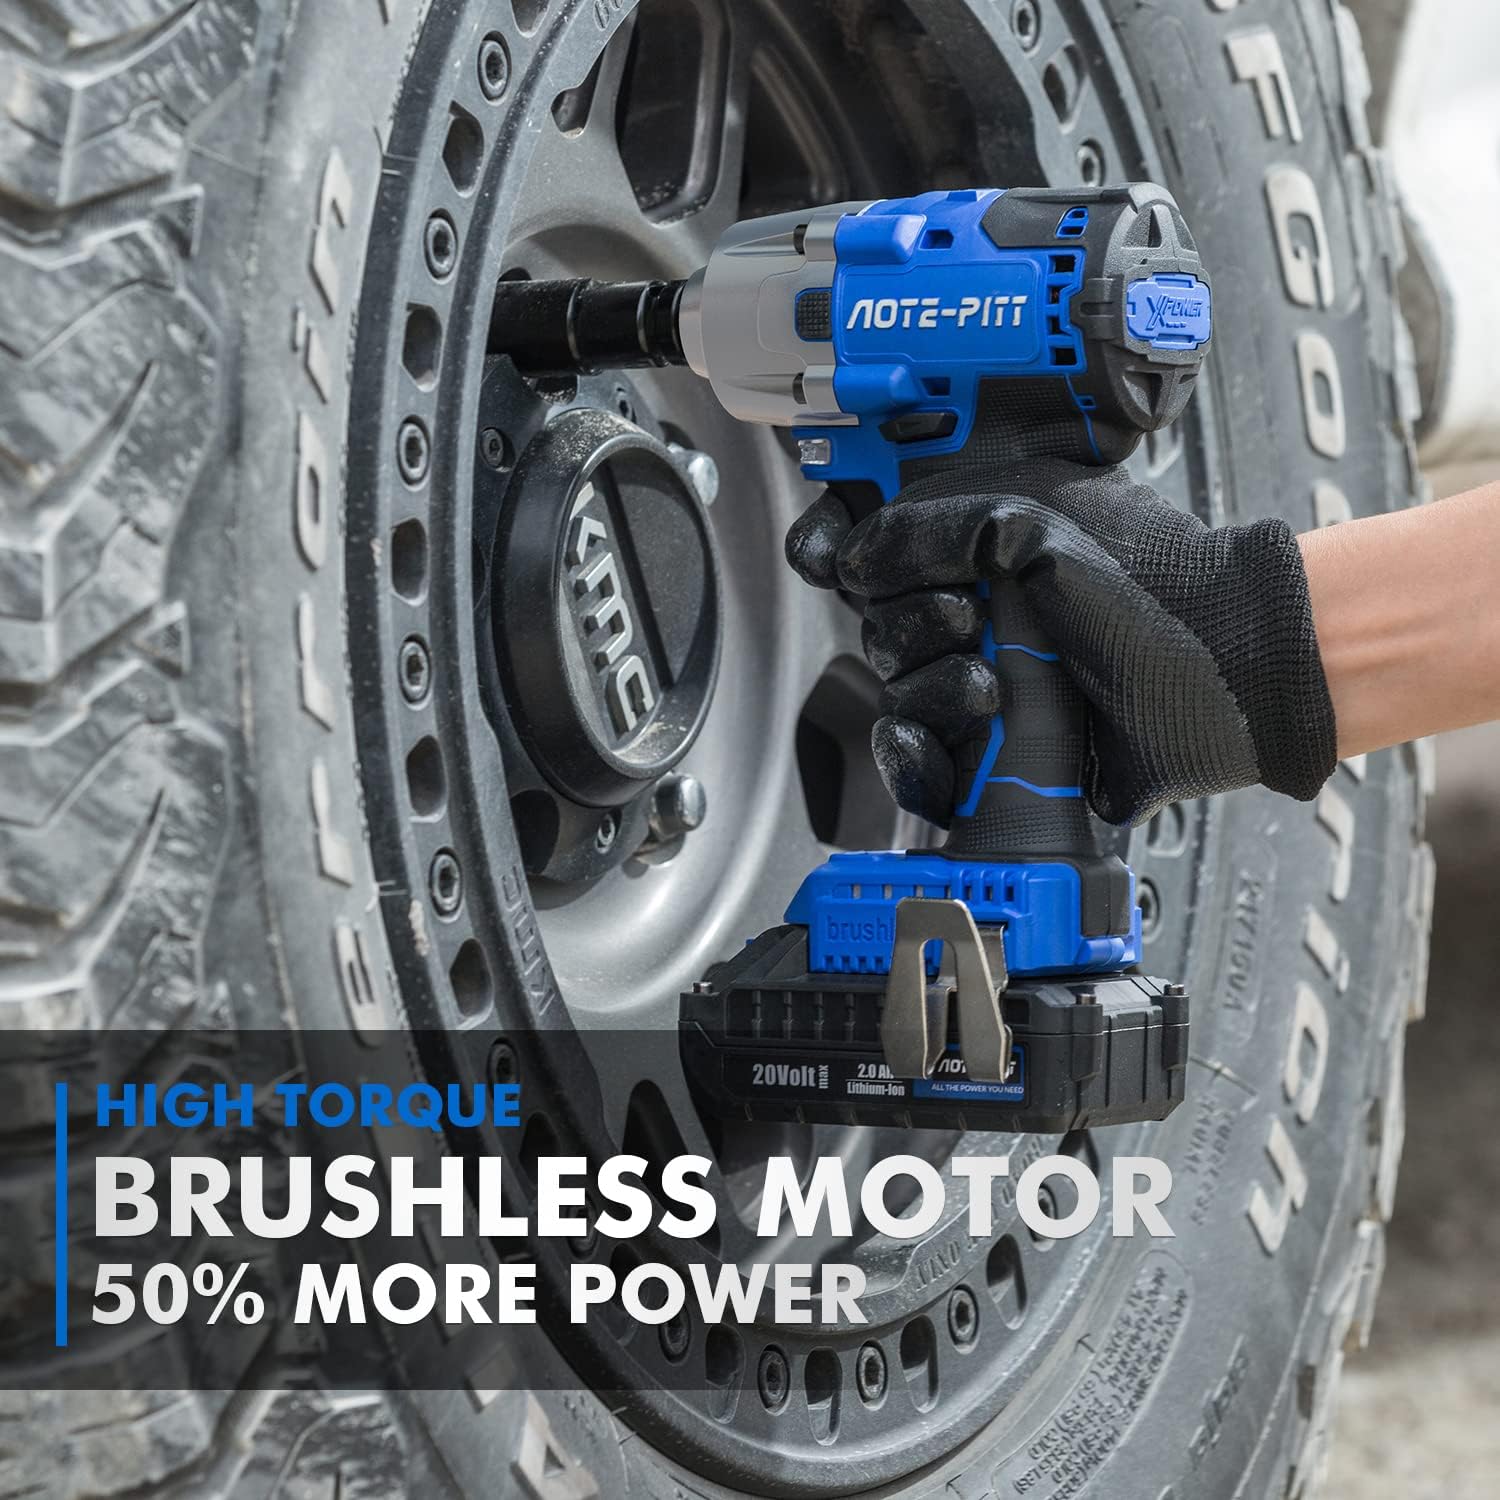 20V 370 Ft-lbs Brushless Impact Wrench Kit, 1/2 Inch Cordless Electric Impact Gun, High Torque 3,400 IPM Impact Driver with 6 Pcs Drive Impact Sockets, 2.0Ah Battery, Fast Charger, and Tools Bag